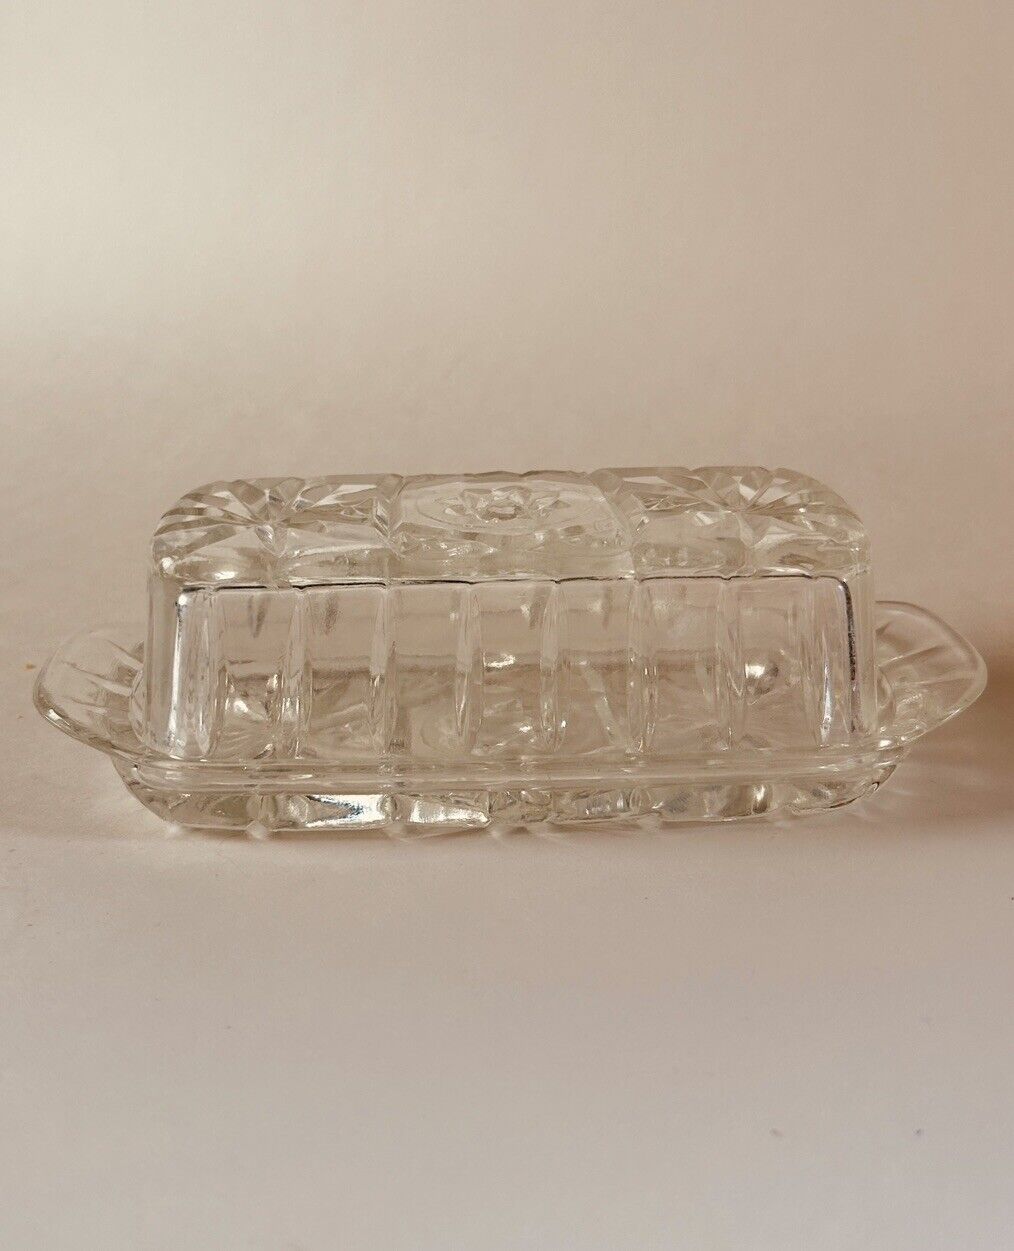 Vintage . Crystal Lidded Butter Dish. Star Pattern. Excellent Condition